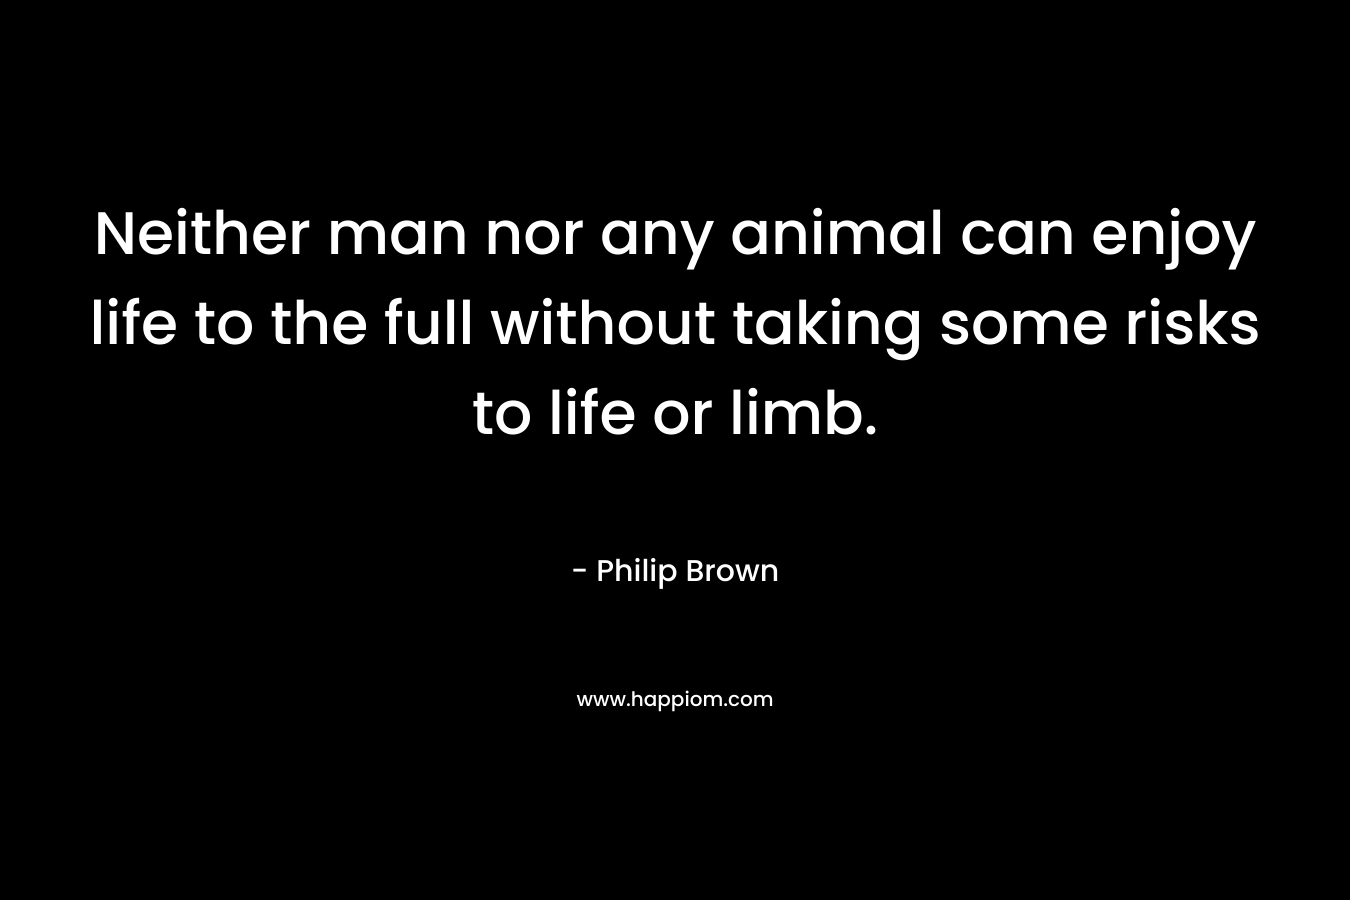 Neither man nor any animal can enjoy life to the full without taking some risks to life or limb.